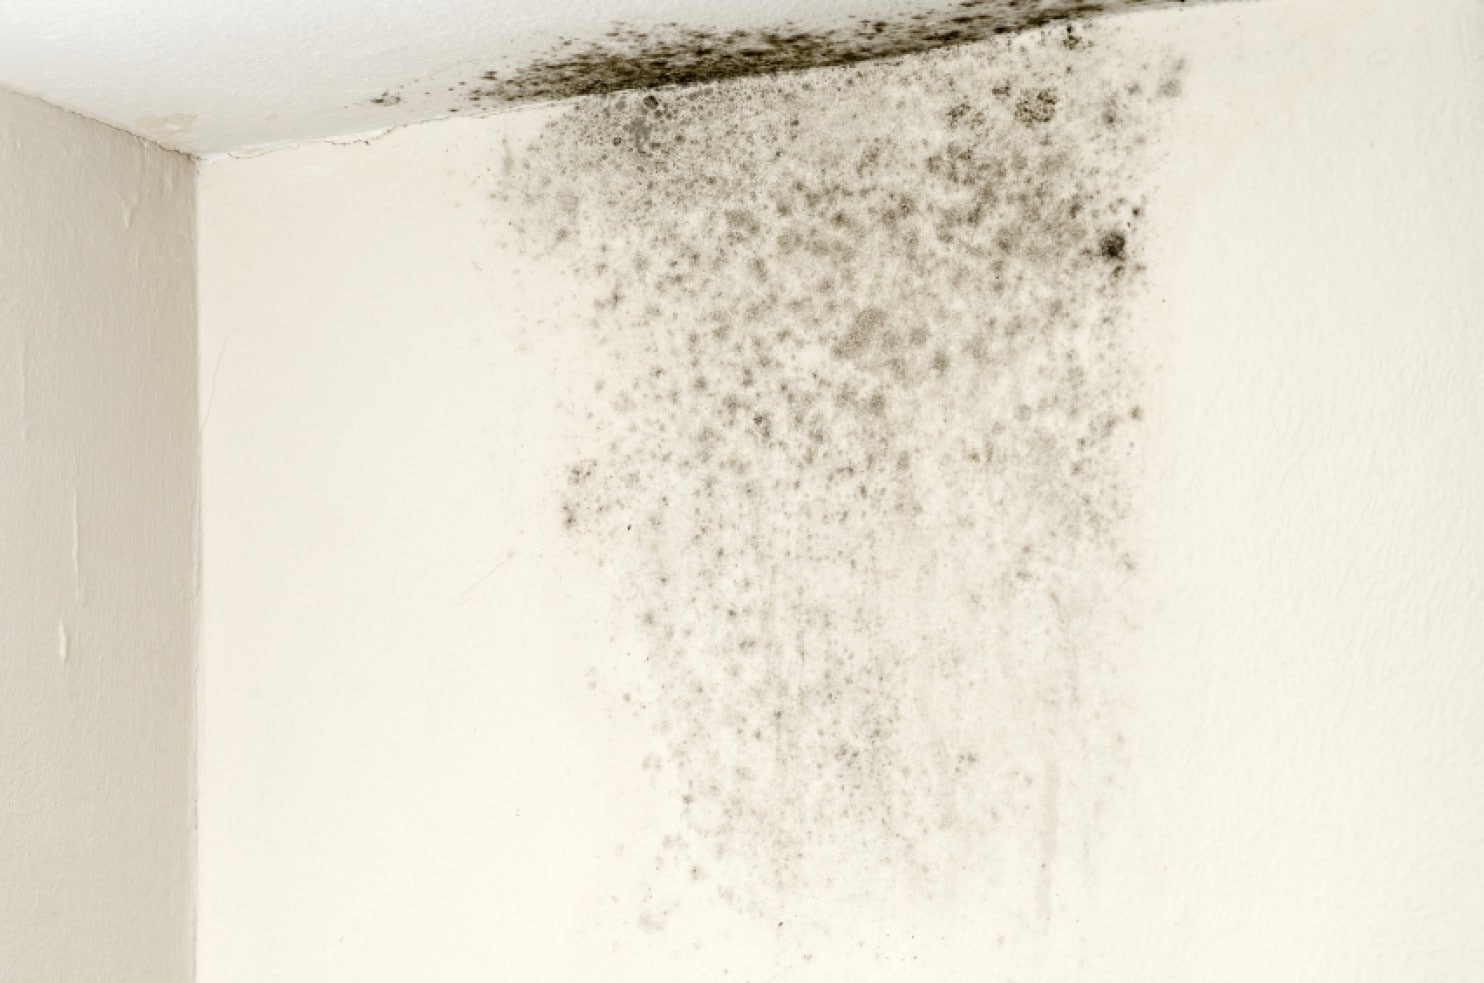 Mold On Walls In Bedroom
 Mold growing in flooded basements or other damp spots can